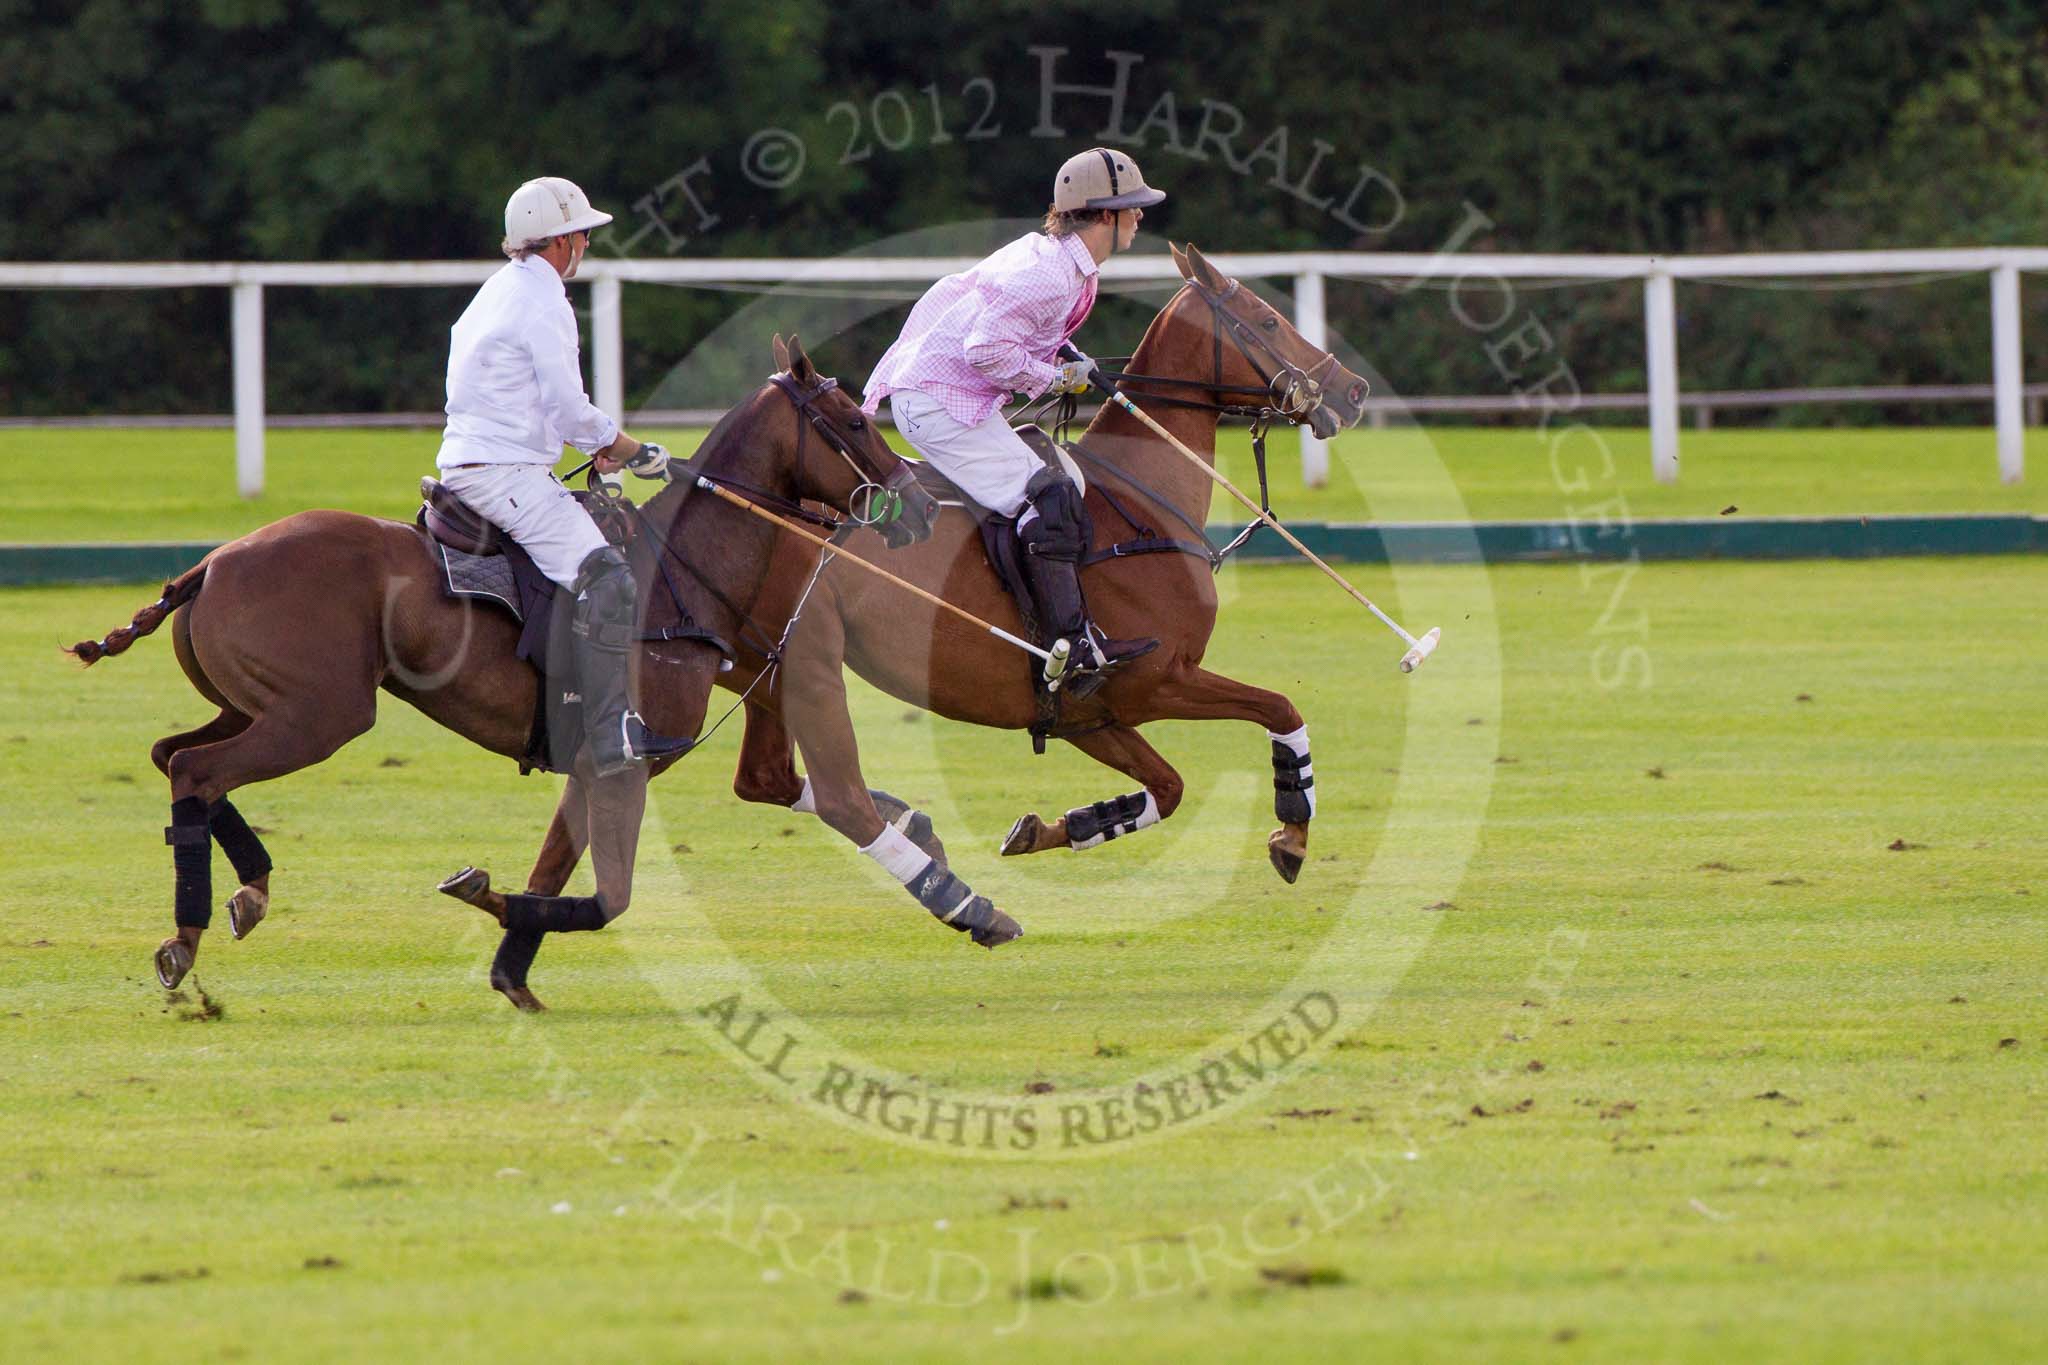 7th Heritage Polo Cup finals: Nico Talamoni & Paul Oberschneider..
Hurtwood Park Polo Club,
Ewhurst Green,
Surrey,
United Kingdom,
on 05 August 2012 at 16:05, image #205